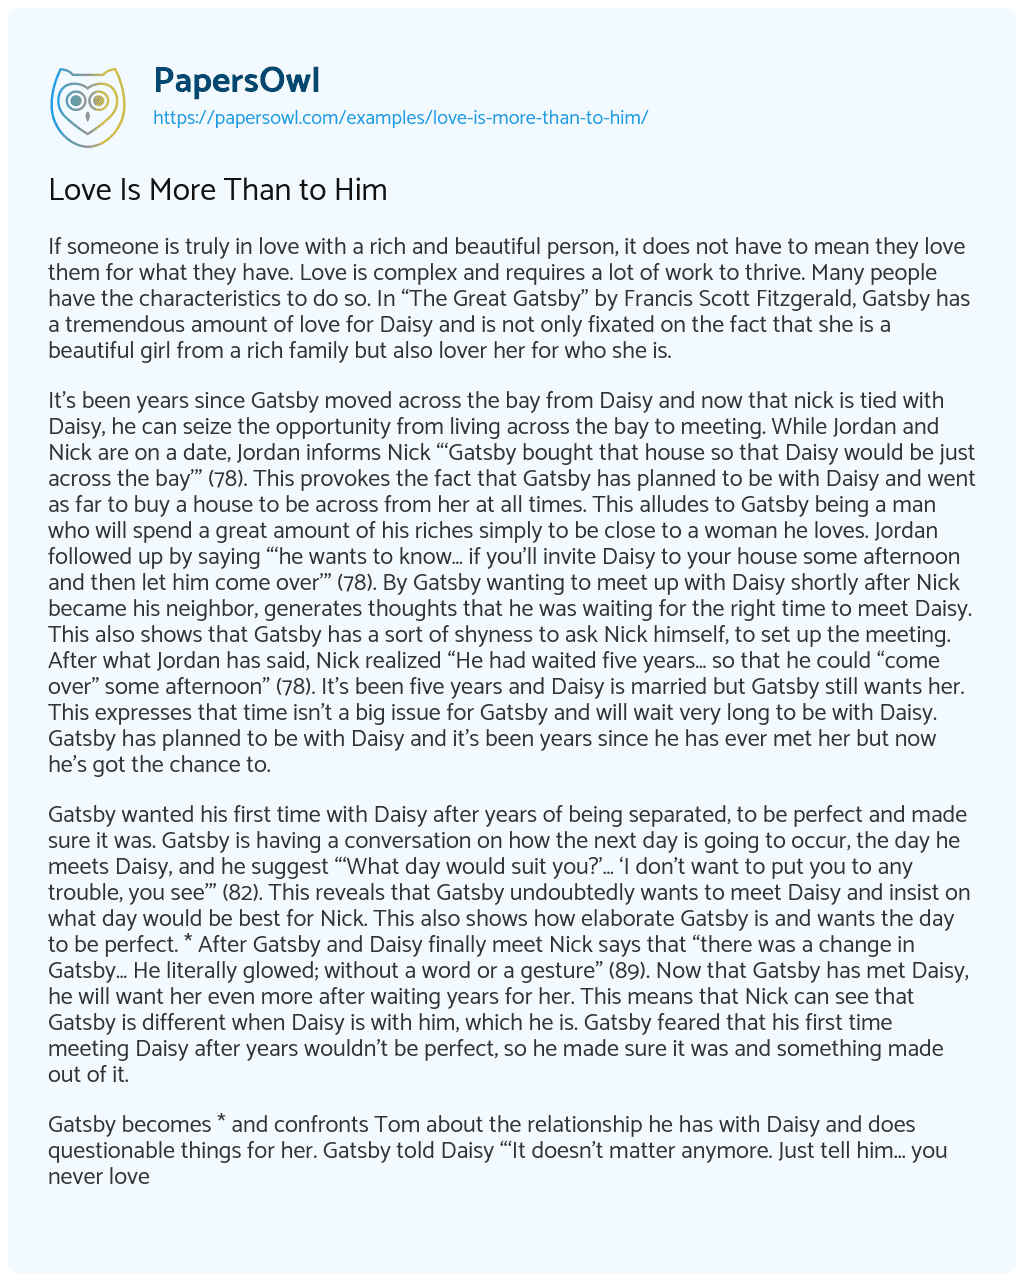 Essay on Love is more than to him